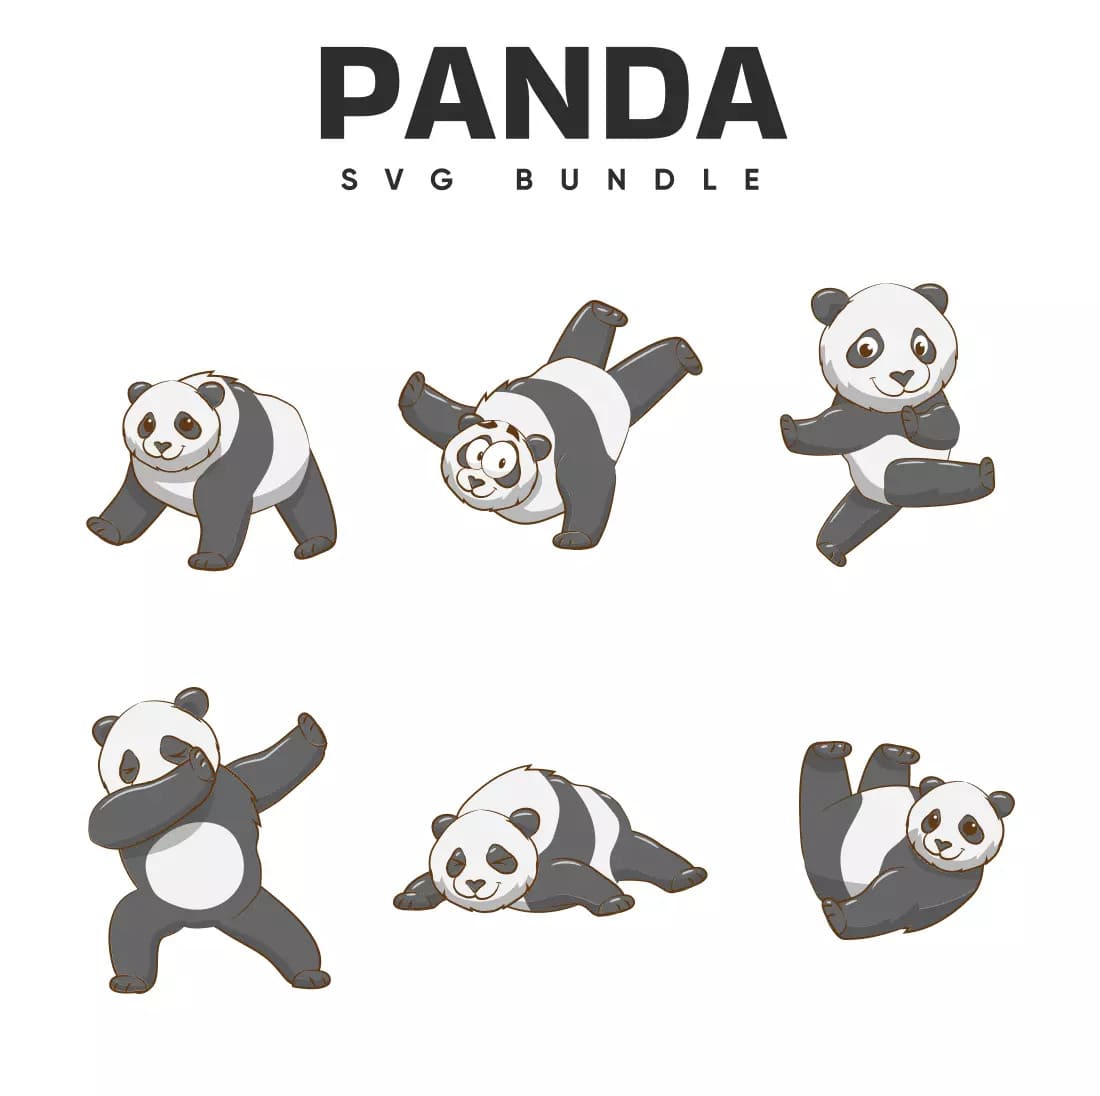 The panda svg bundle includes a panda doing different things.